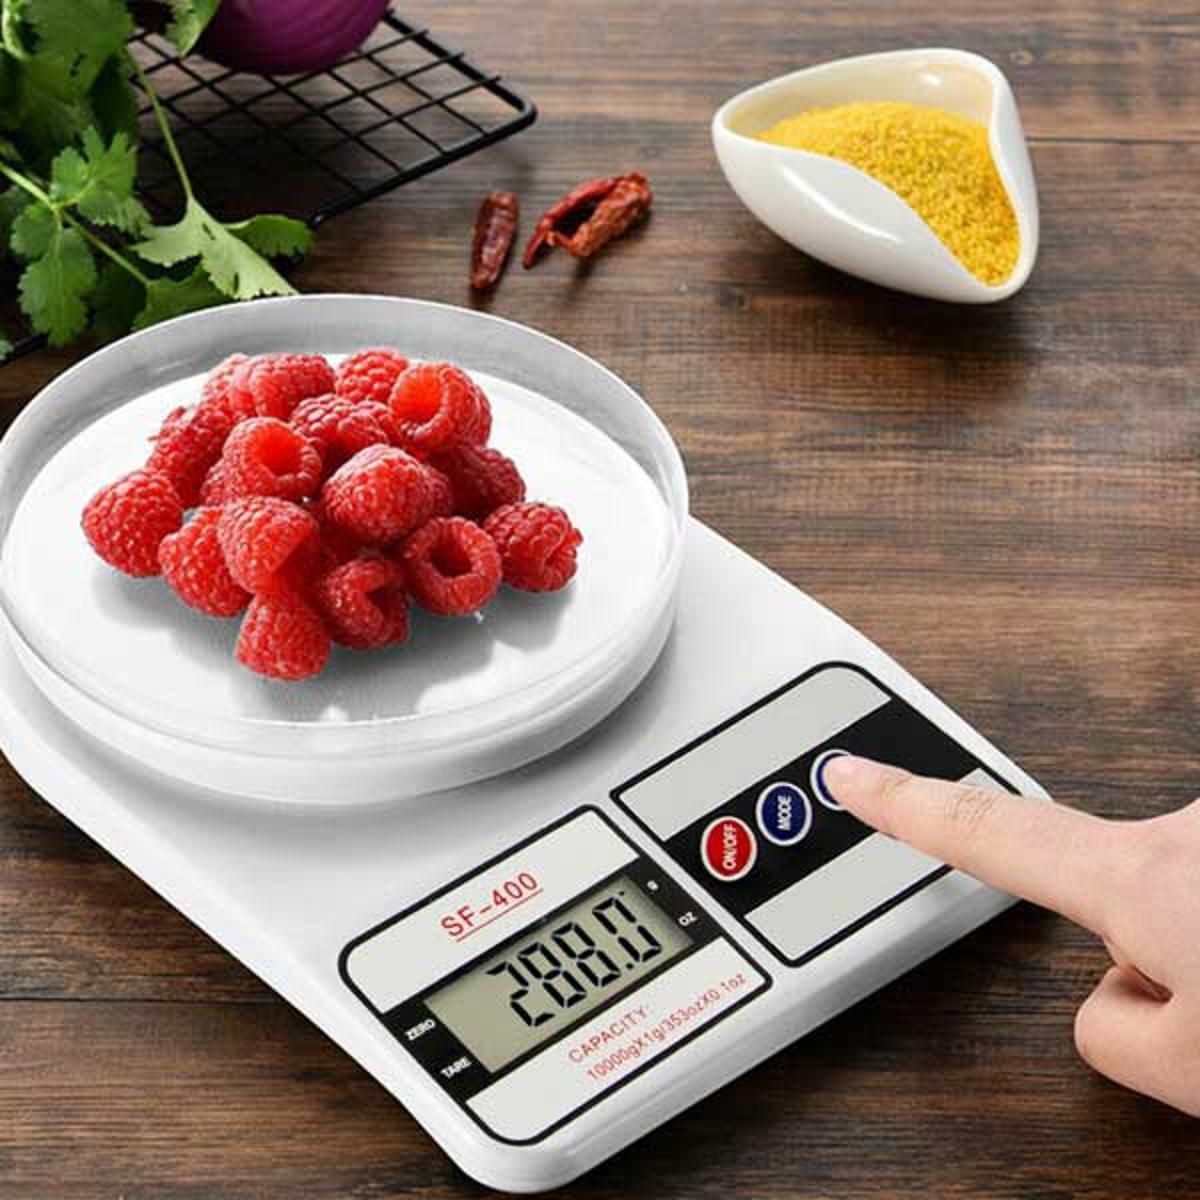 https://www.oshi.pk/images/variation/kitchen-scale-electronic-digital-kitchen-scale-small-weight-machine-10-kg-portable-weight-machine-for-weighing-multiple-stuff-like-food-vegetable-f-20545-395.jpg